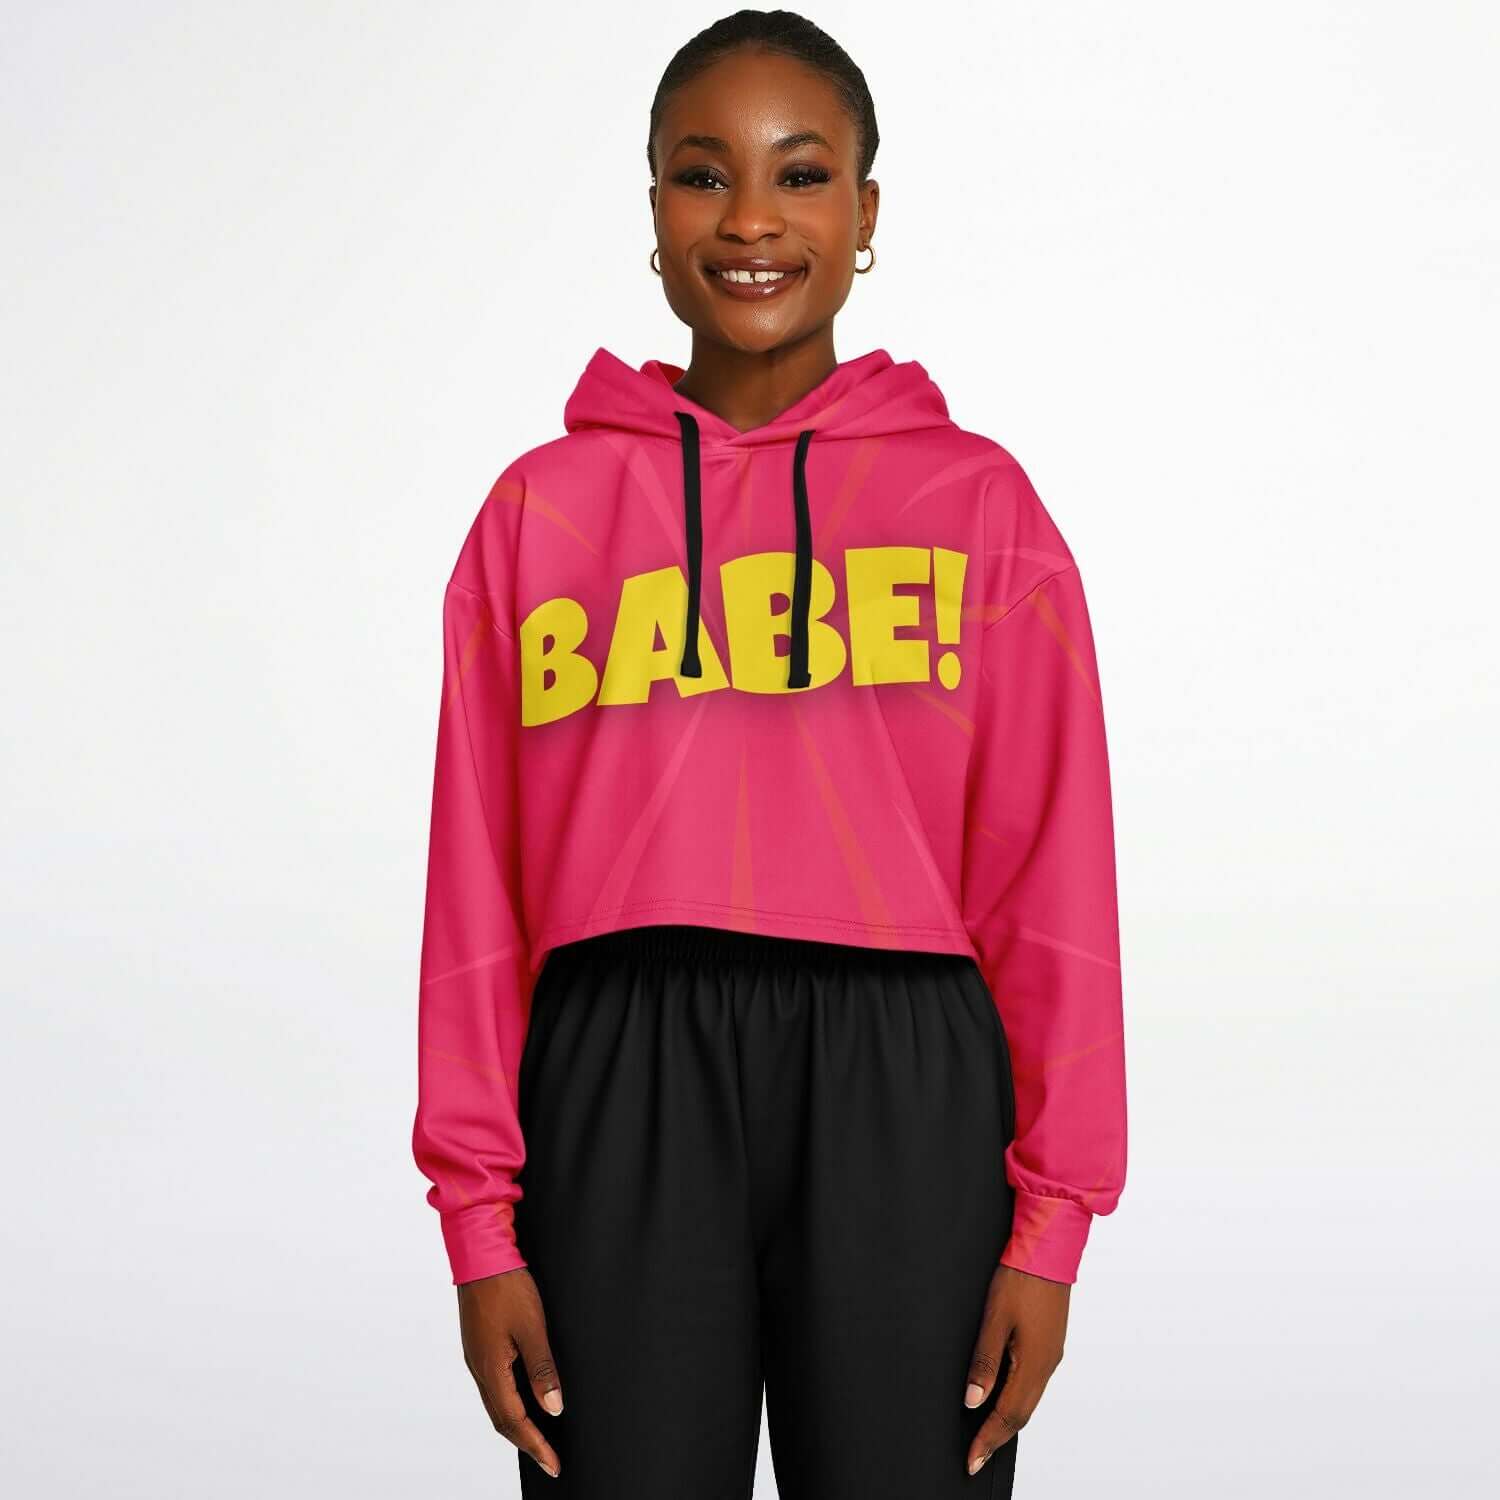 Red BABE! Cropped Hoodie